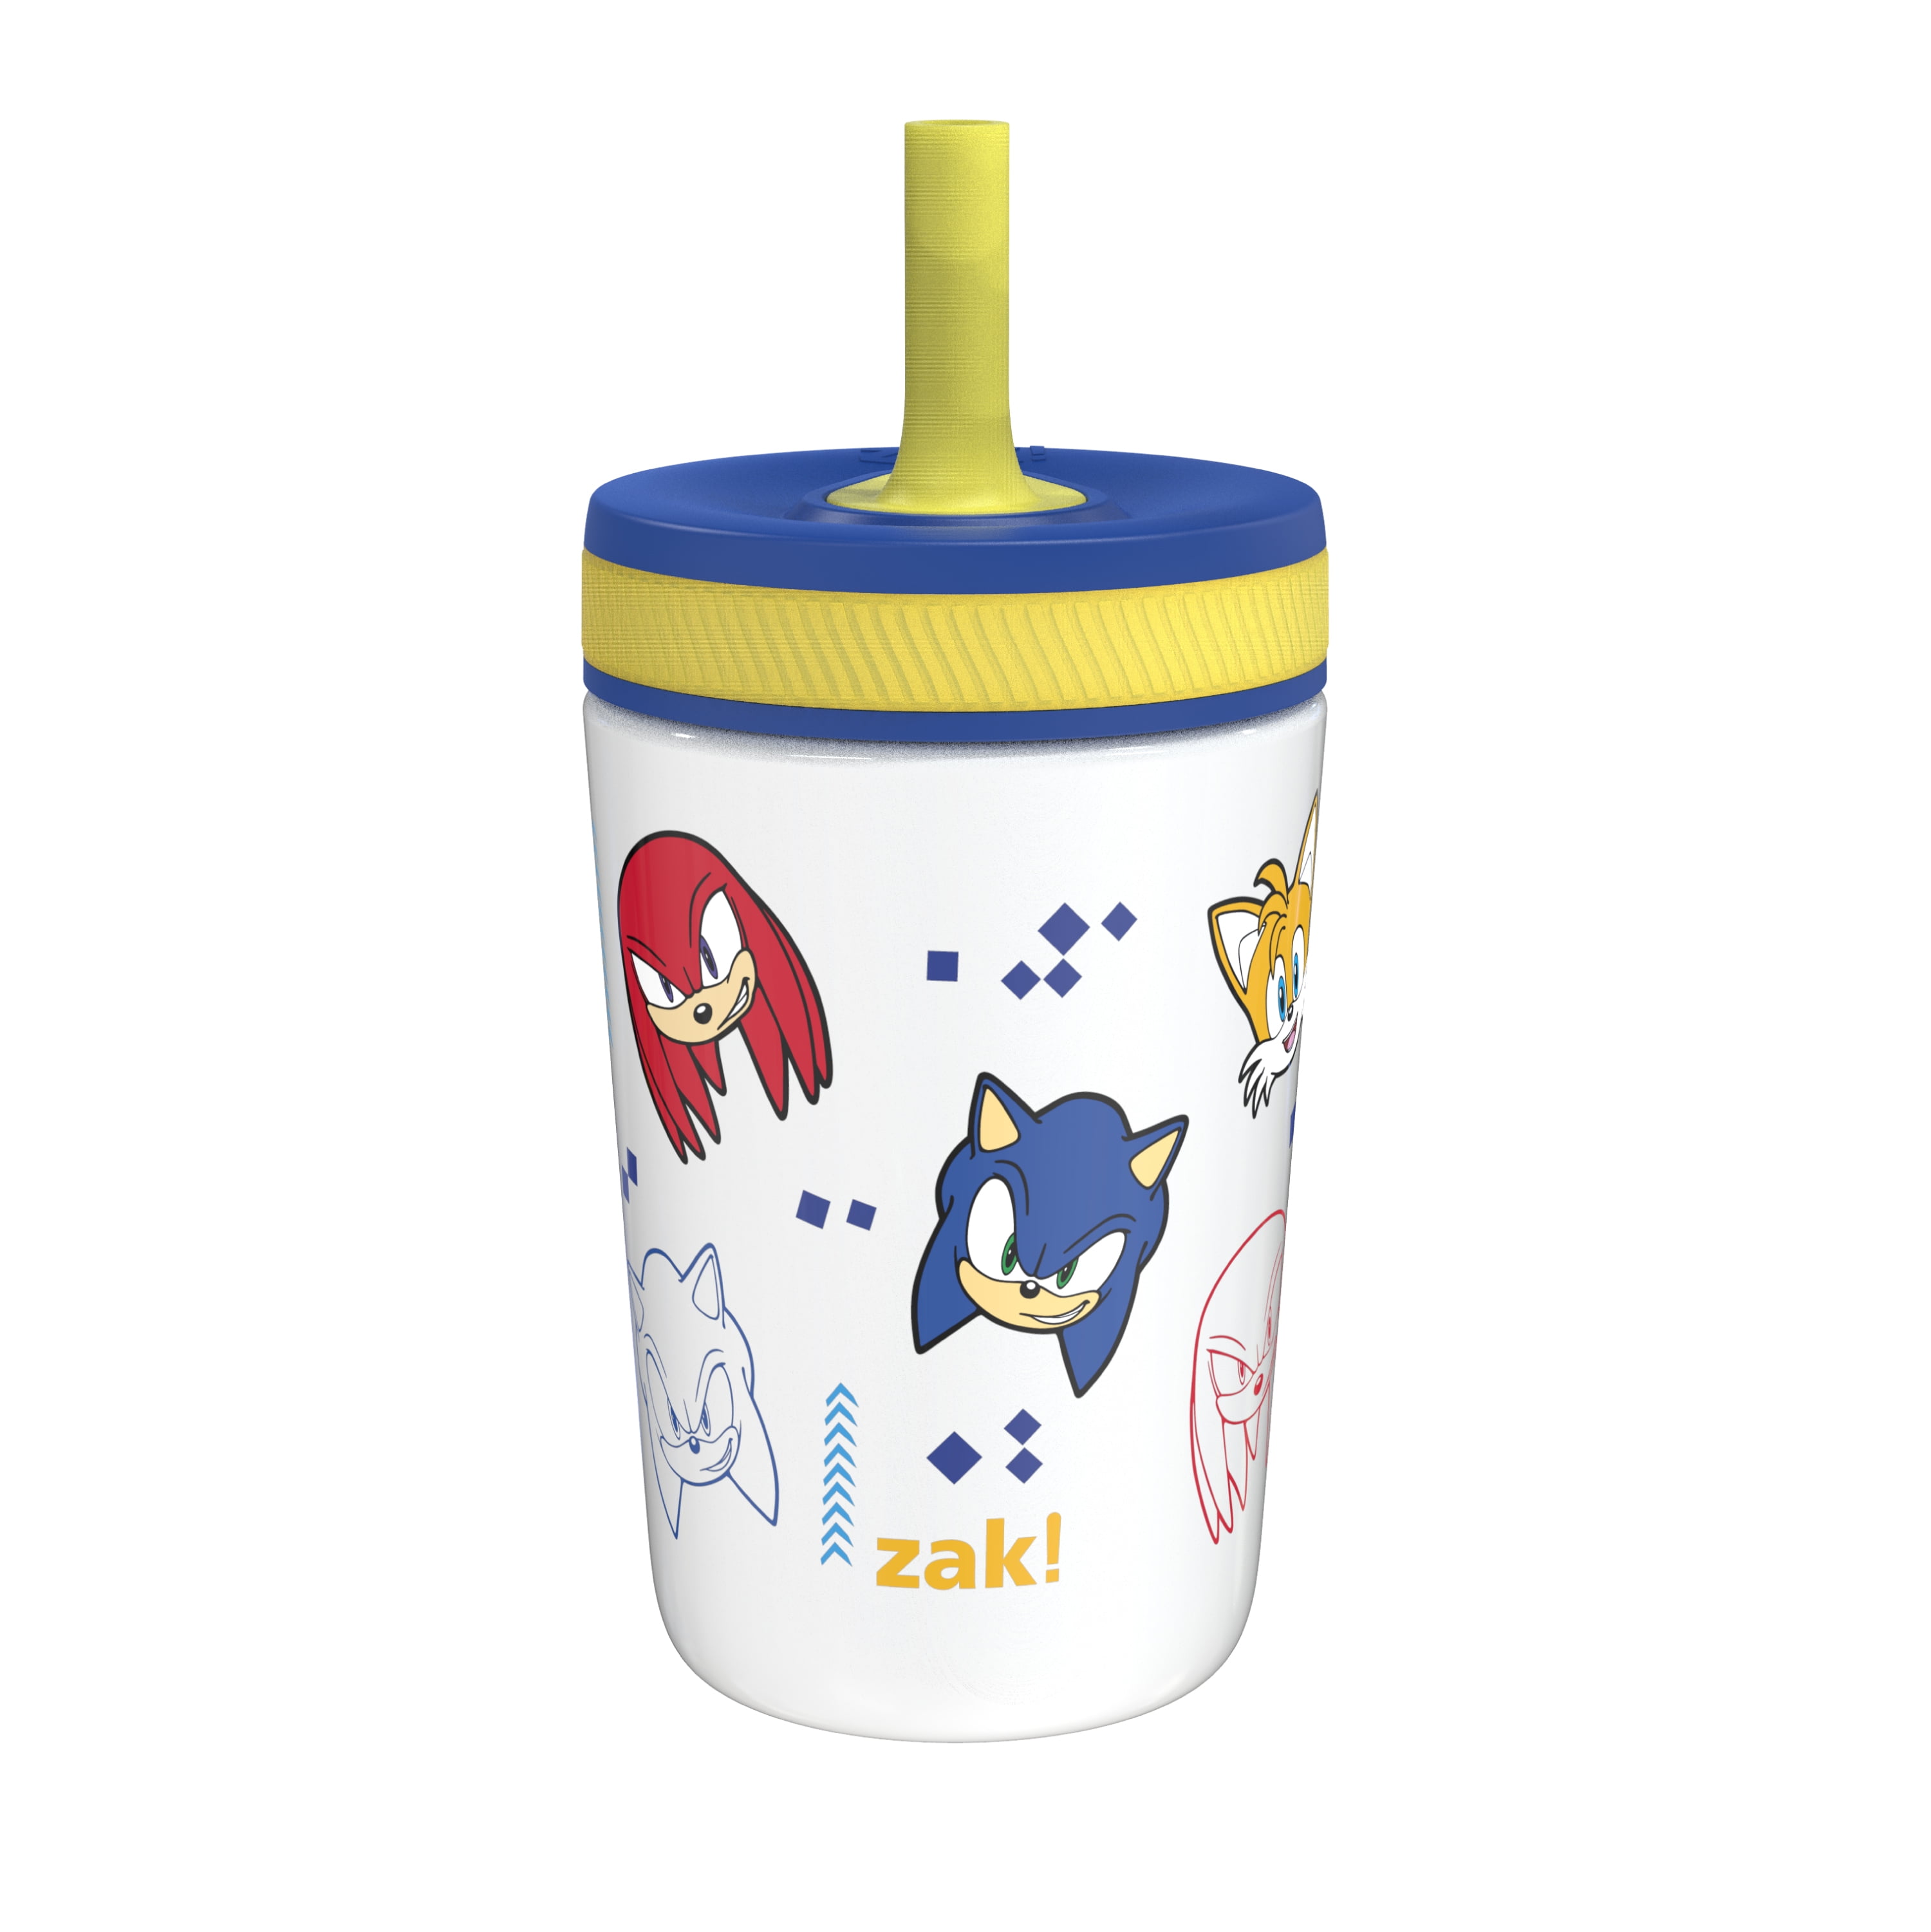 Zak Designs Sonic the Hedgehog Kelso Toddler Cups For Travel or At Home,  12oz Vacuum Insulated Stain…See more Zak Designs Sonic the Hedgehog Kelso